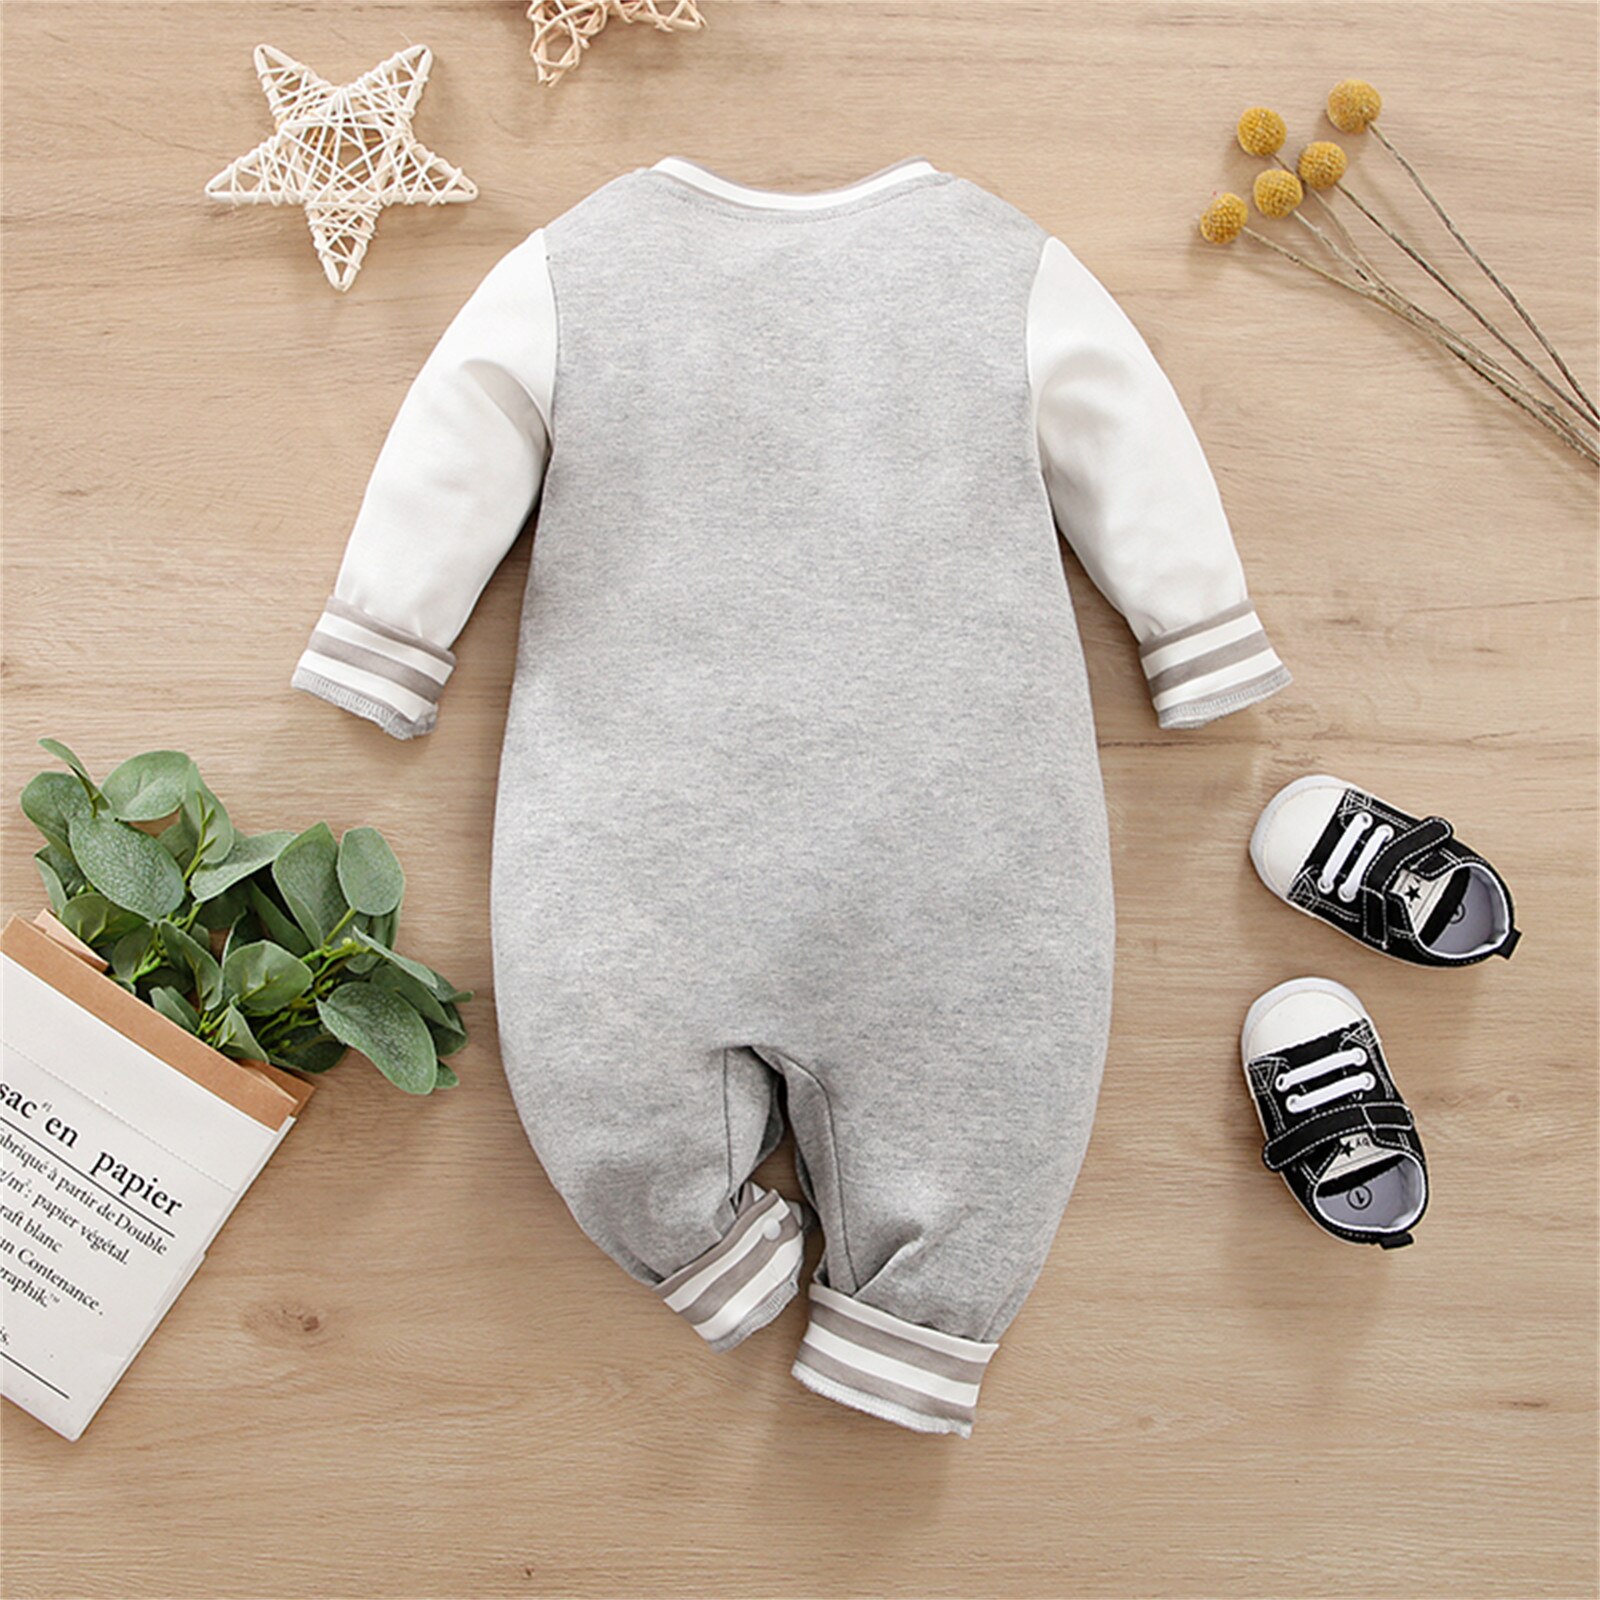 PatPat-100-Cotton-Baby-Boy-Clothes-New-Born-Girl-Overalls-Jumpsuit-Romper-Infant-Newborn-Letter-Embroidered-1